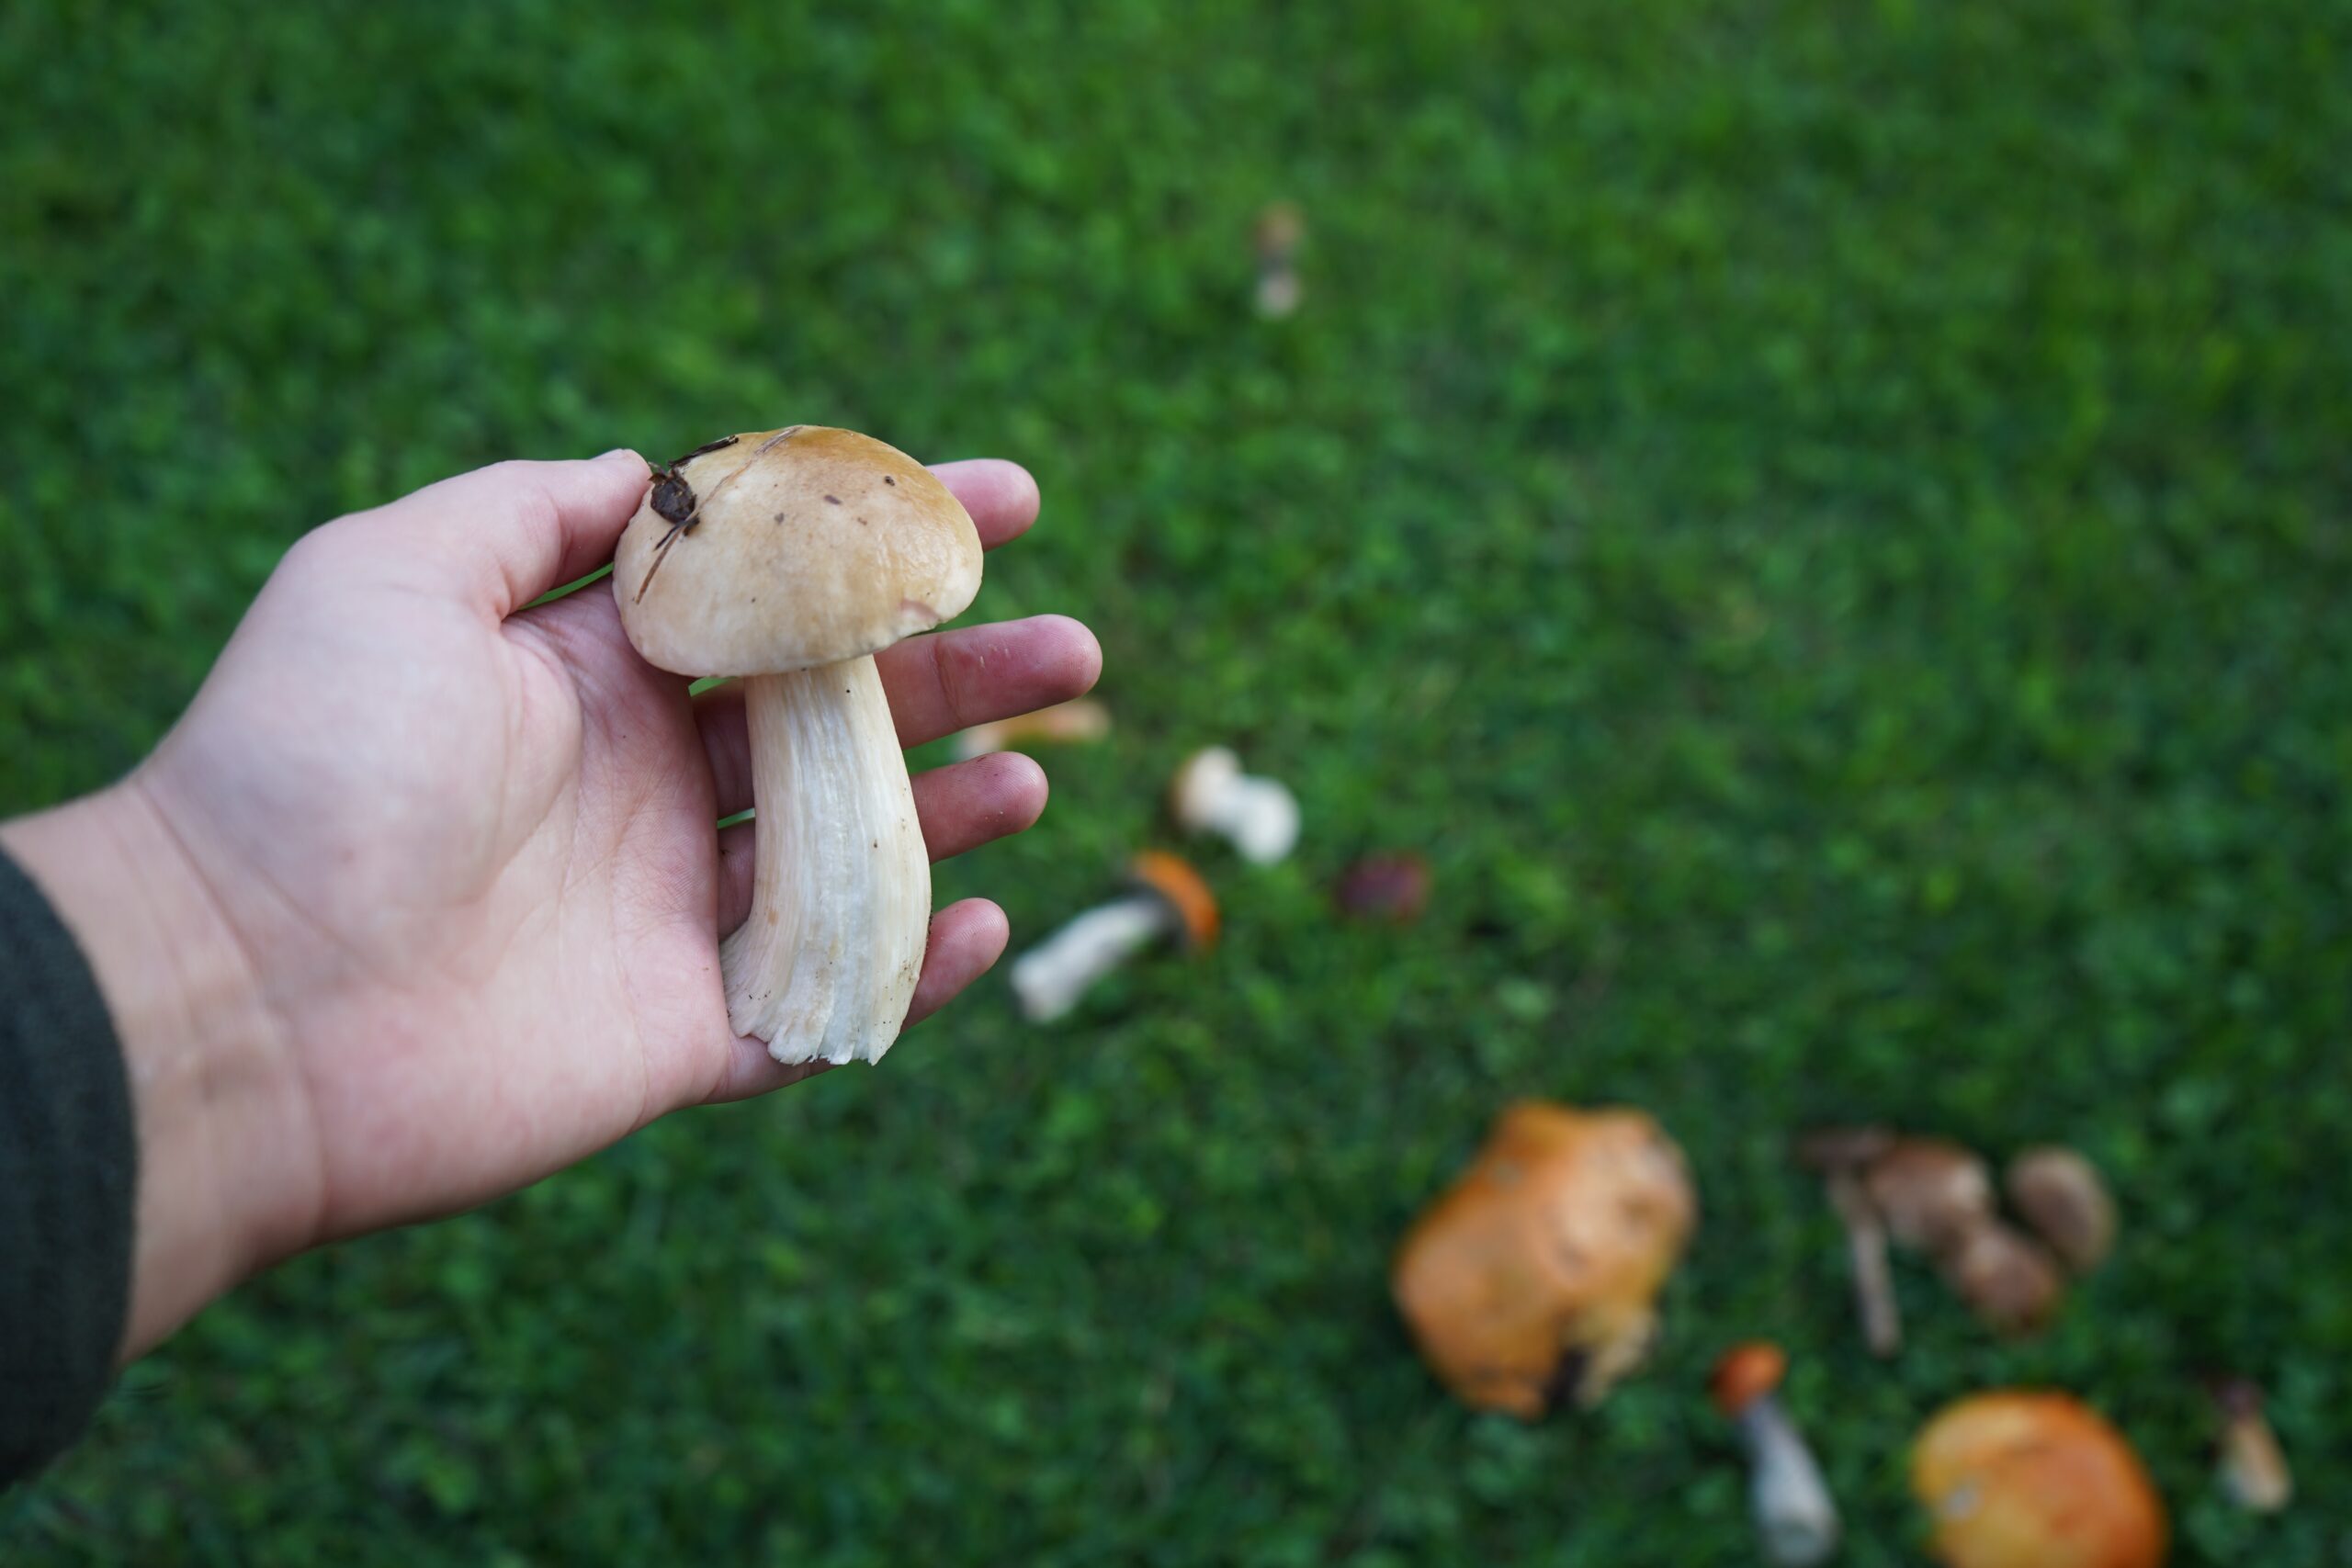 someone holding a bolete mushroom in their hand, with more mushrooms growing in the grass in the background